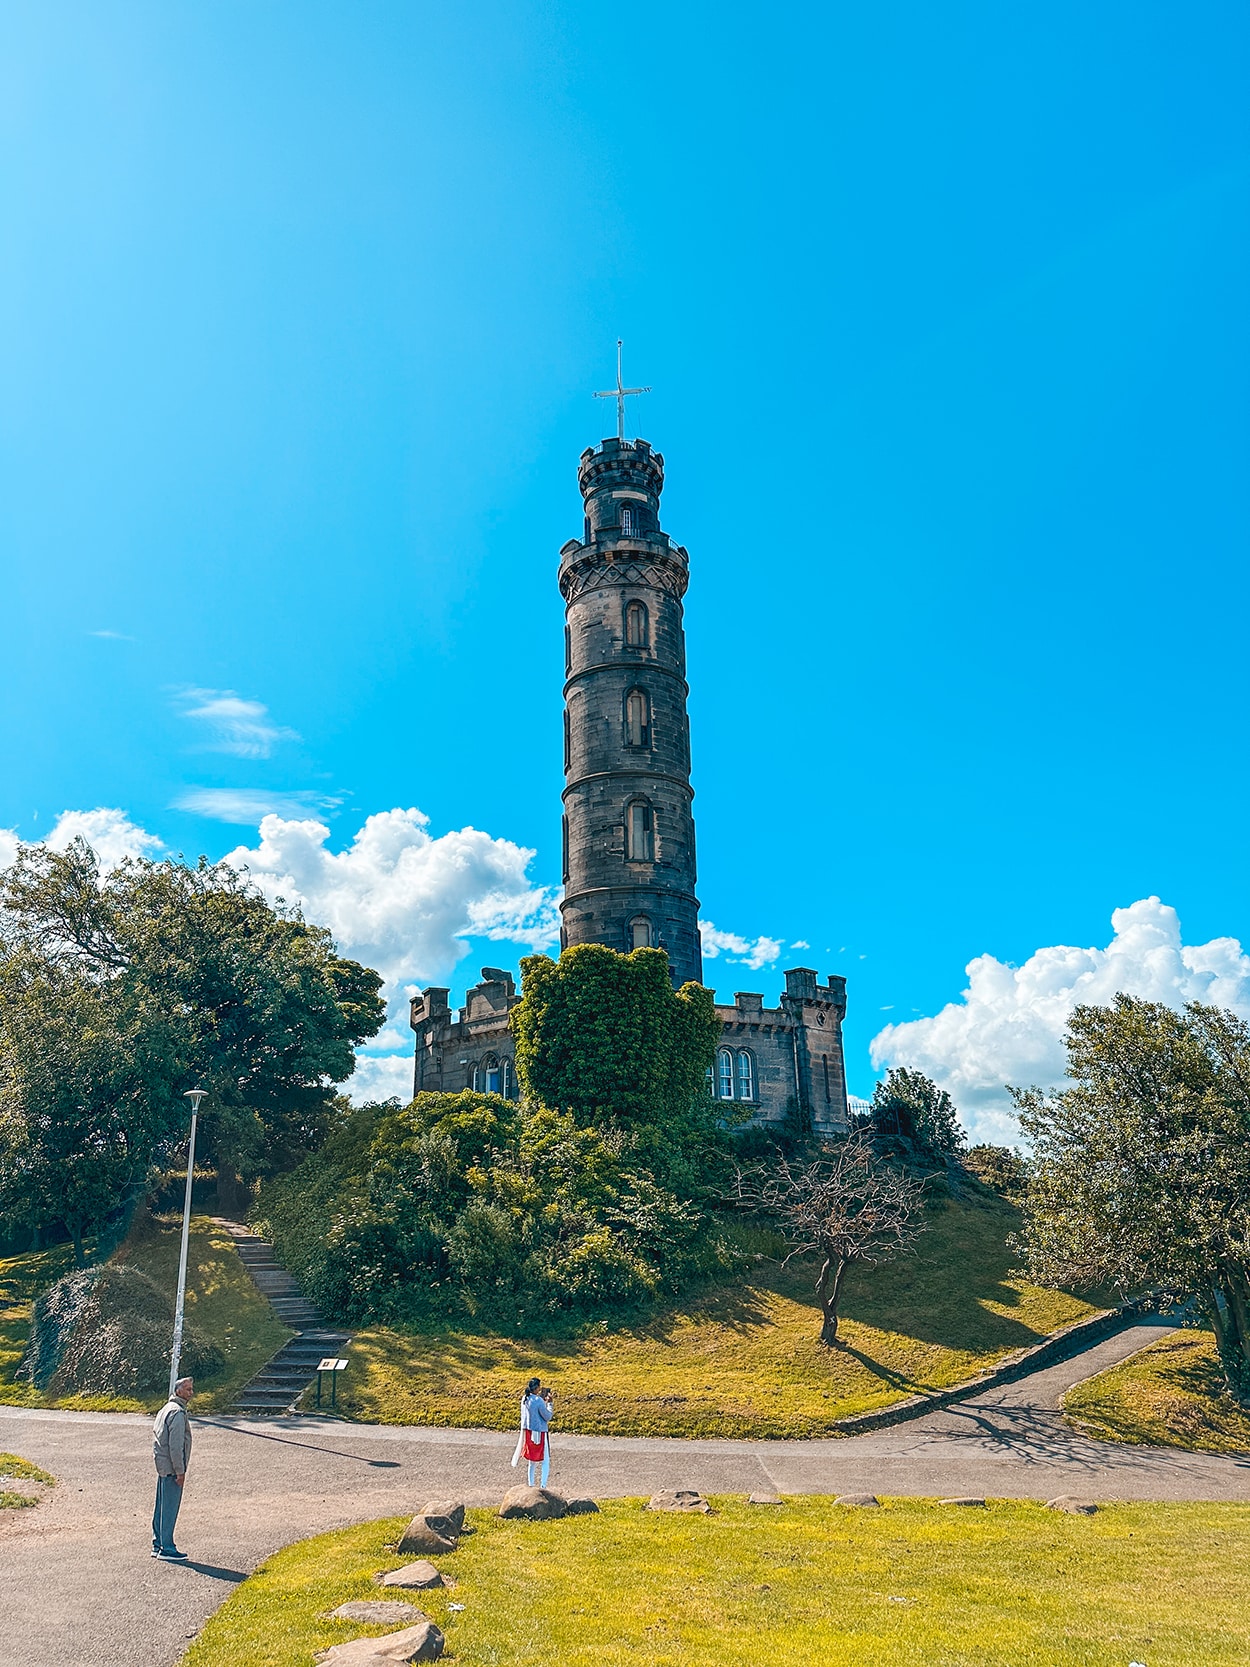 Nelson Monument on Calton Hill - photo by Keryn Means editor of Twist Travel Magazine